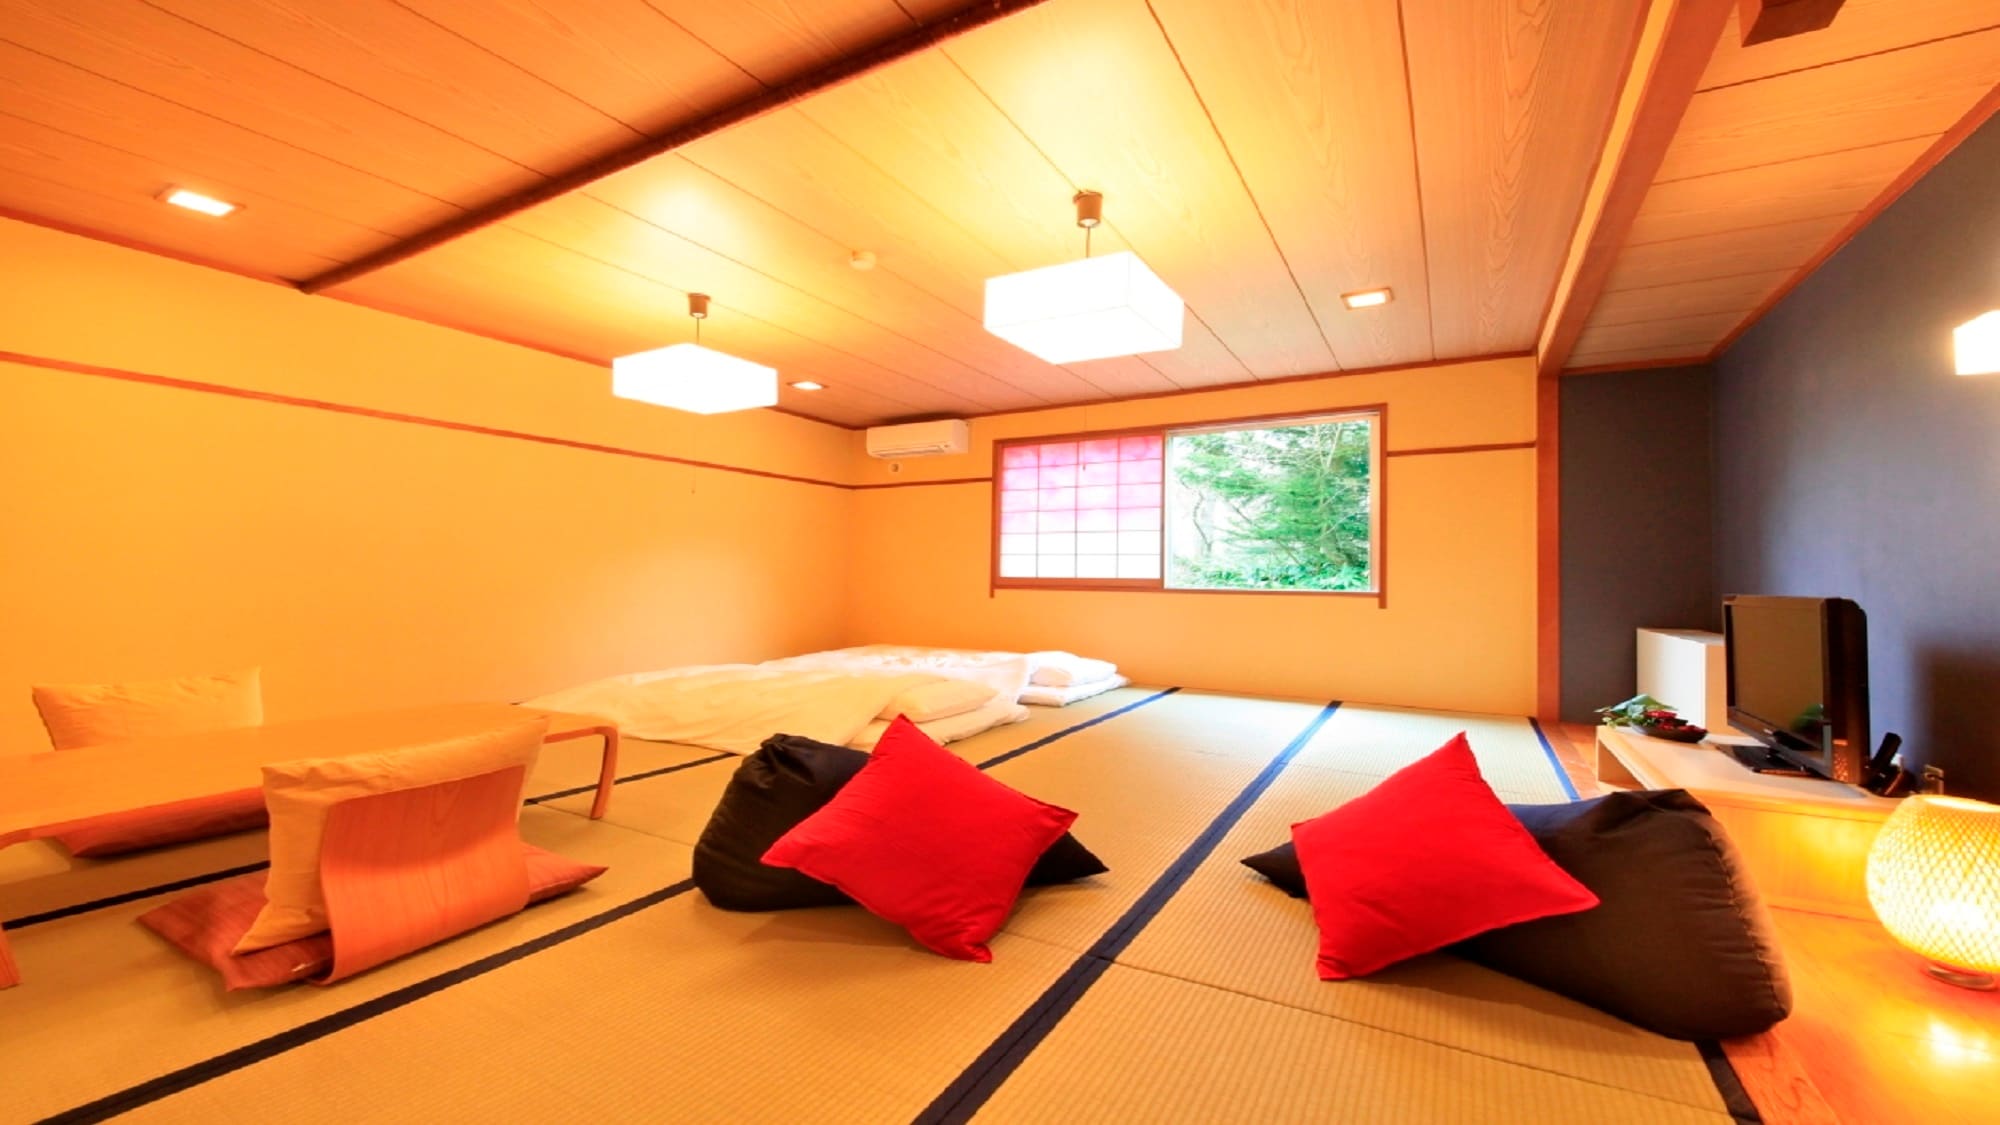 ■ "Japanese-style room" can accommodate up to 6 people.